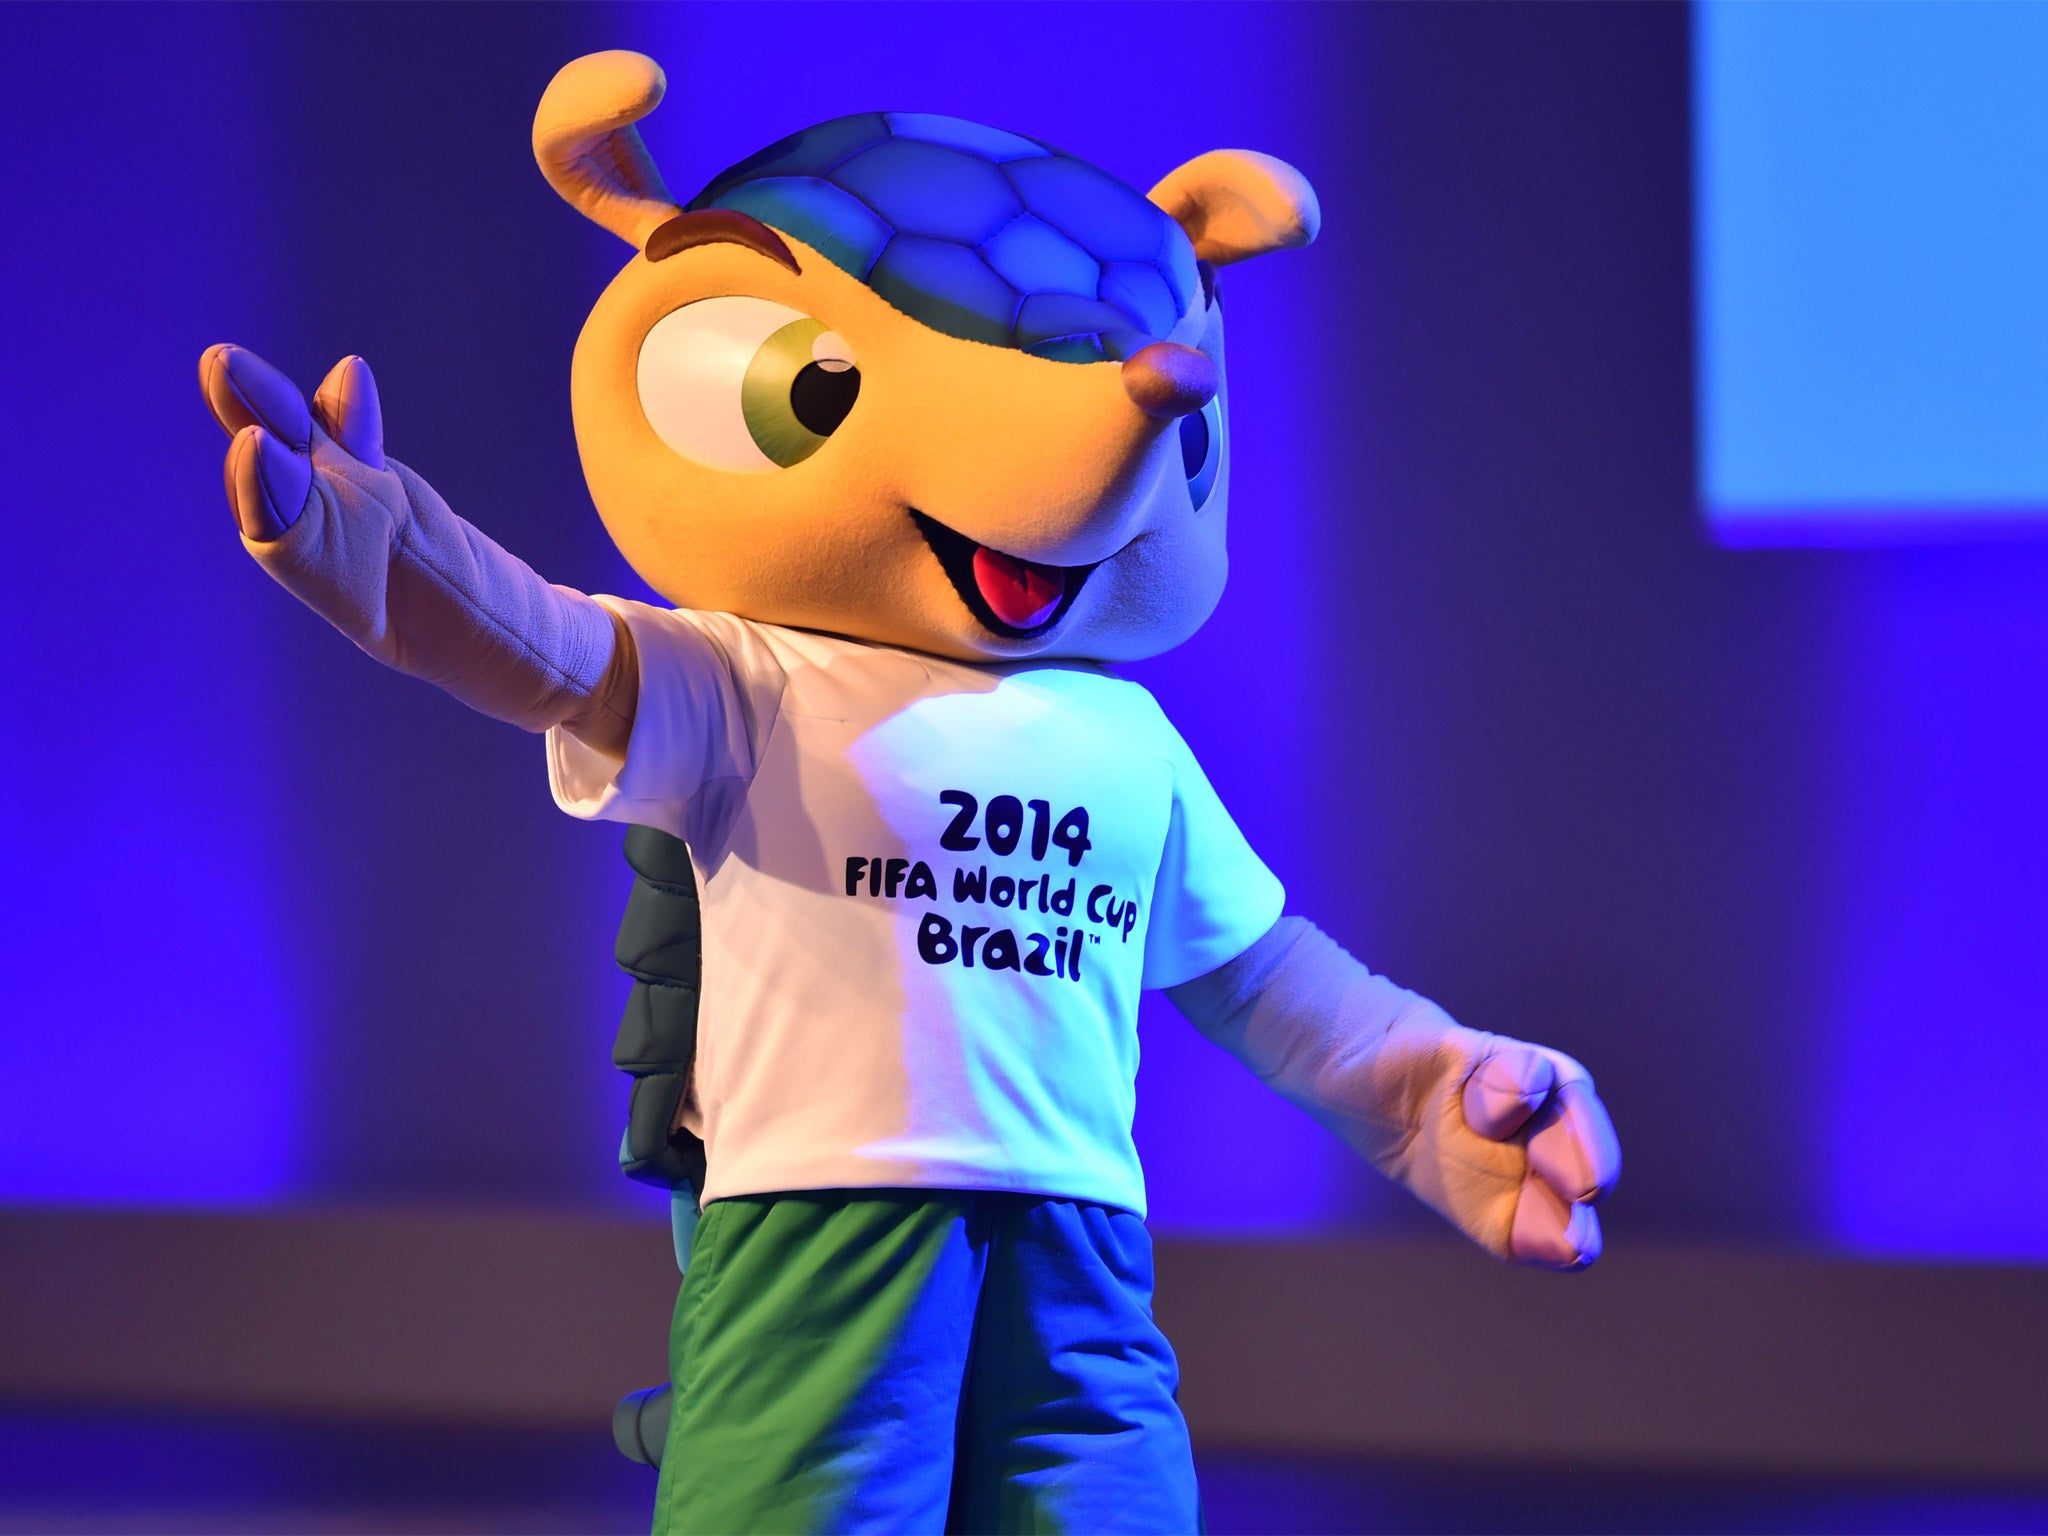 Fuleco, the official mascot of the Brazil World Cup